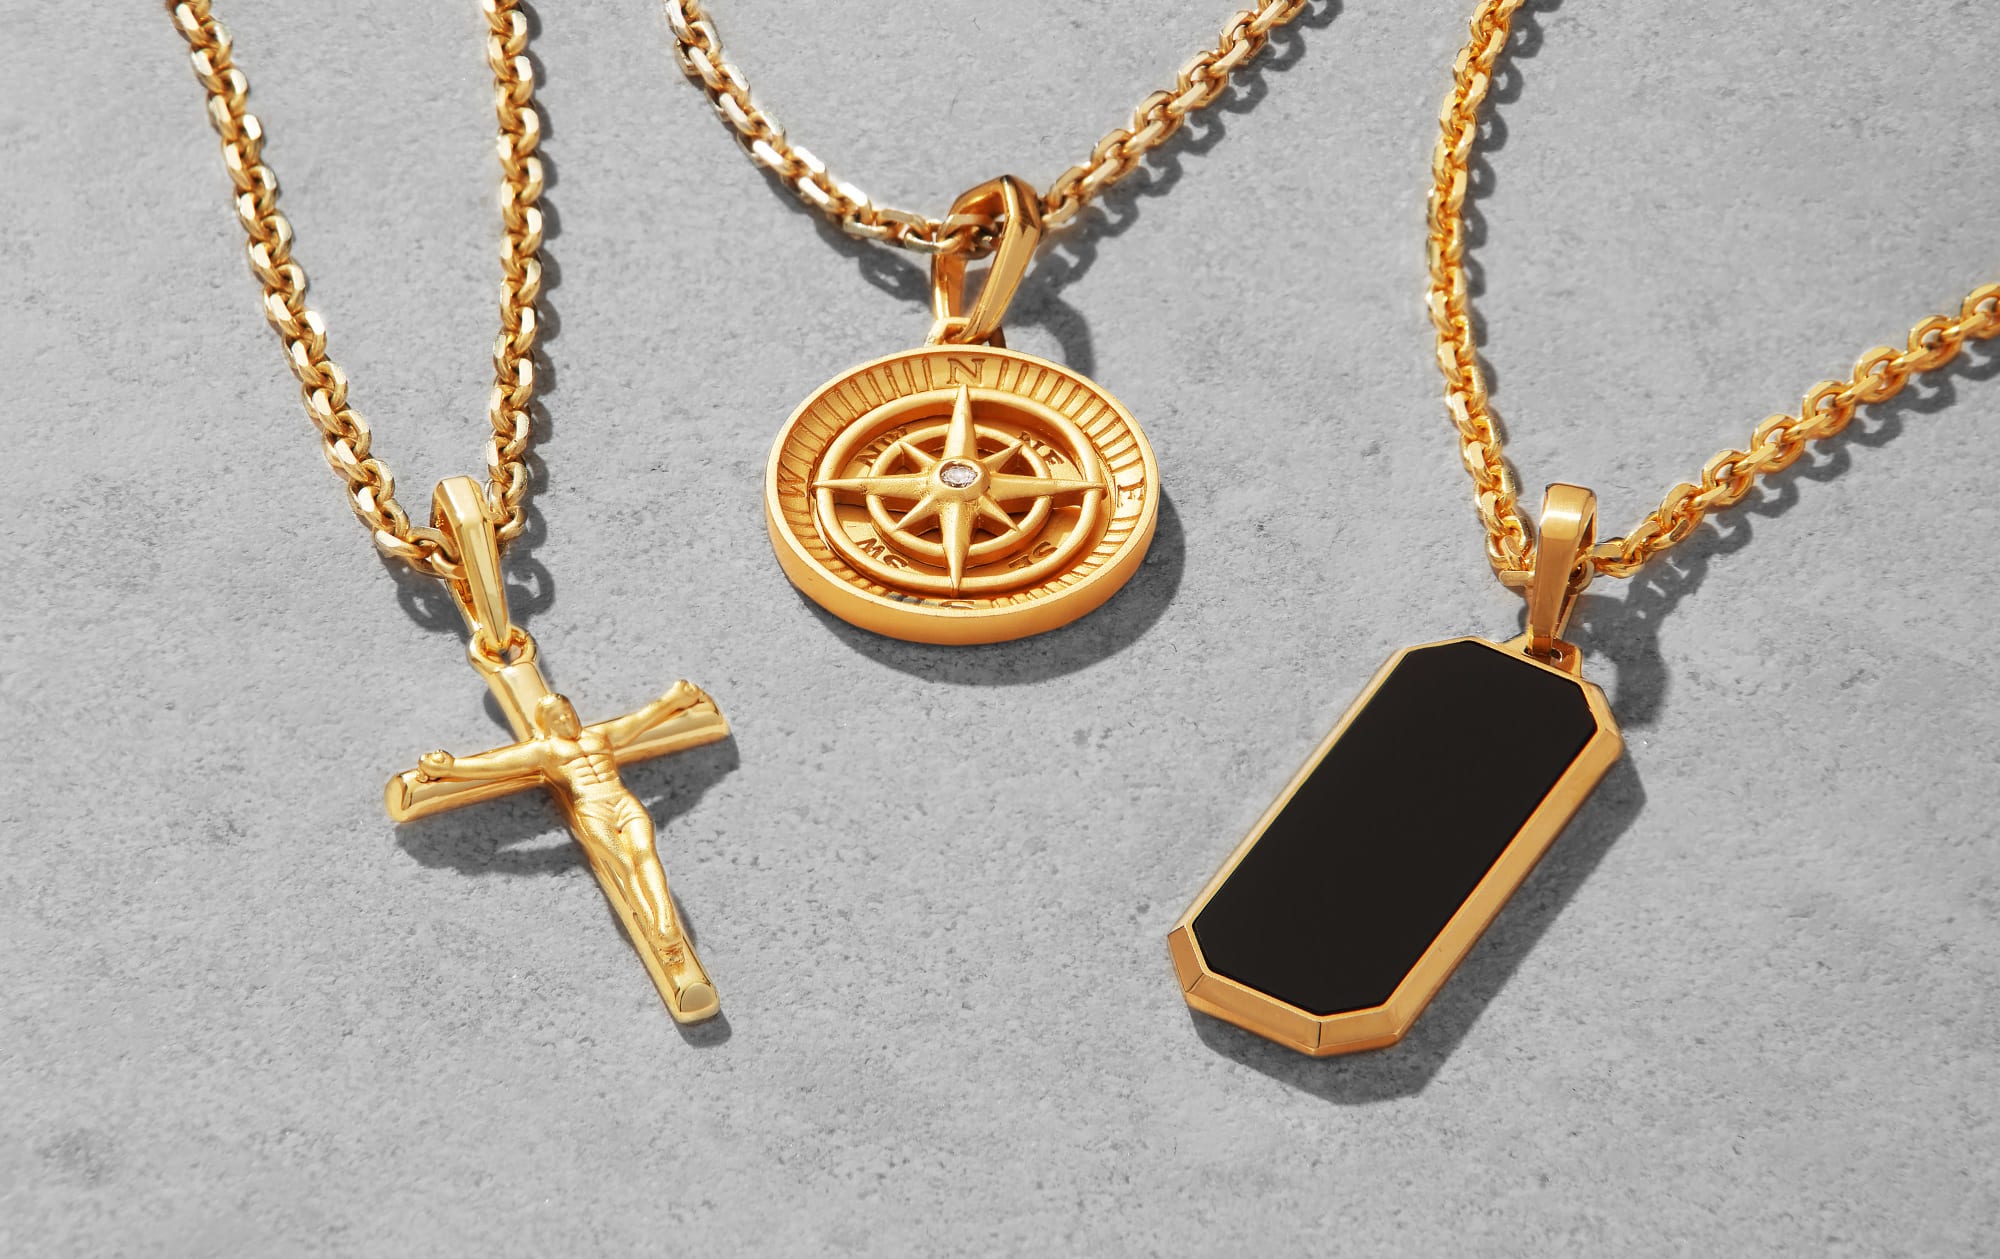 JAXXON's Gold Crucifix, Compass, and Onyx Beverly Pendants on gold cable chains laid out together on a flat grey background.